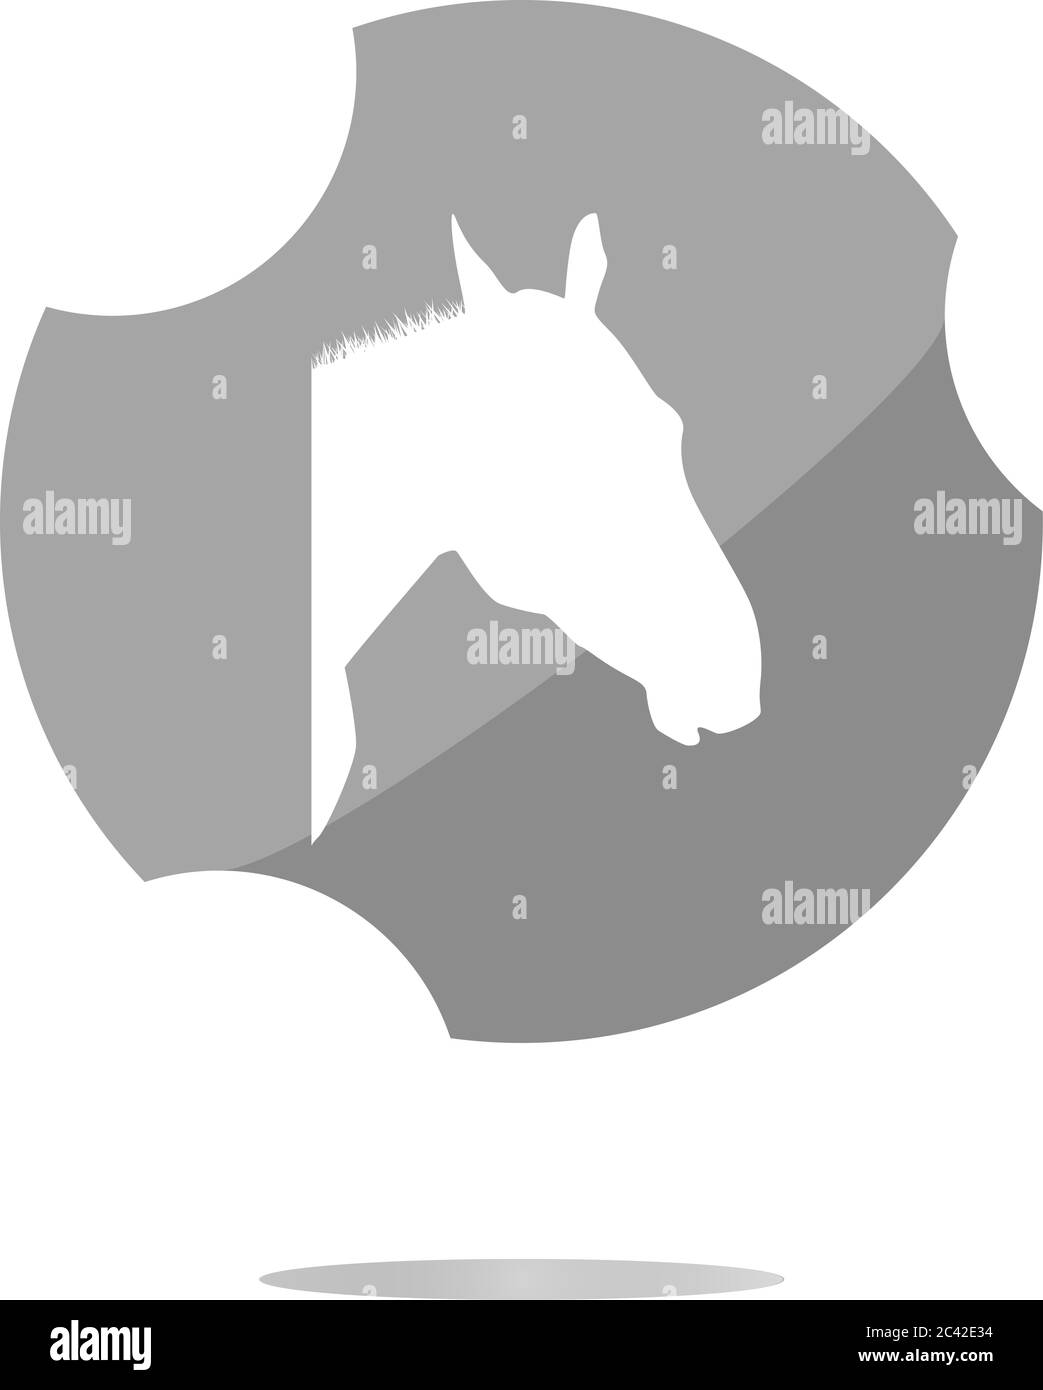 horse sign button, web app icon . Flat sign isolated on white background Stock Photo